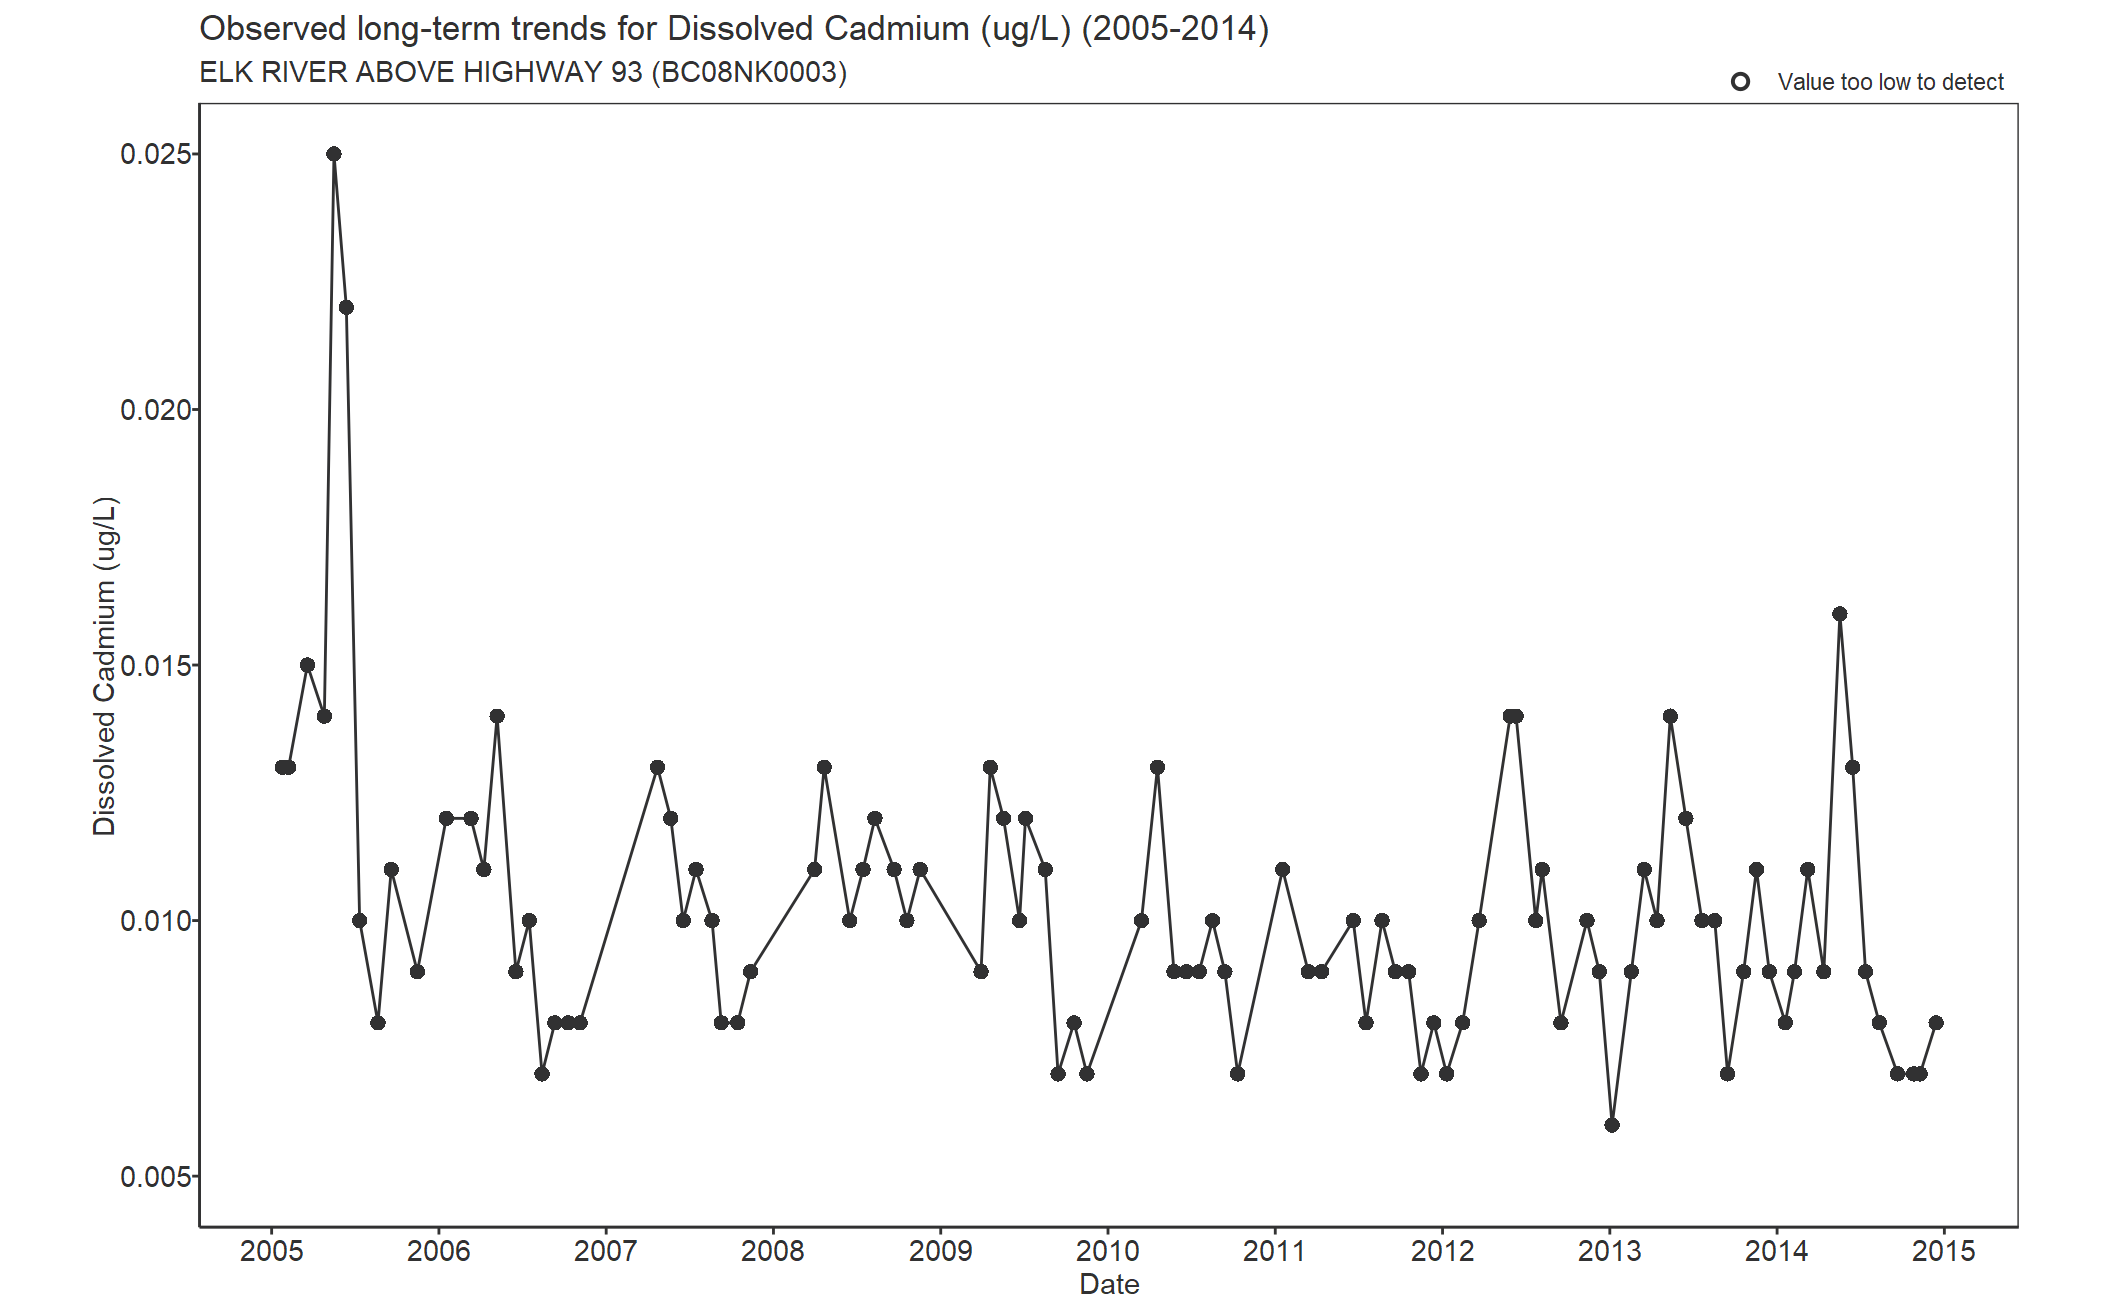 Observed long-term trends for Cadmium Dissolved (2005-2014)